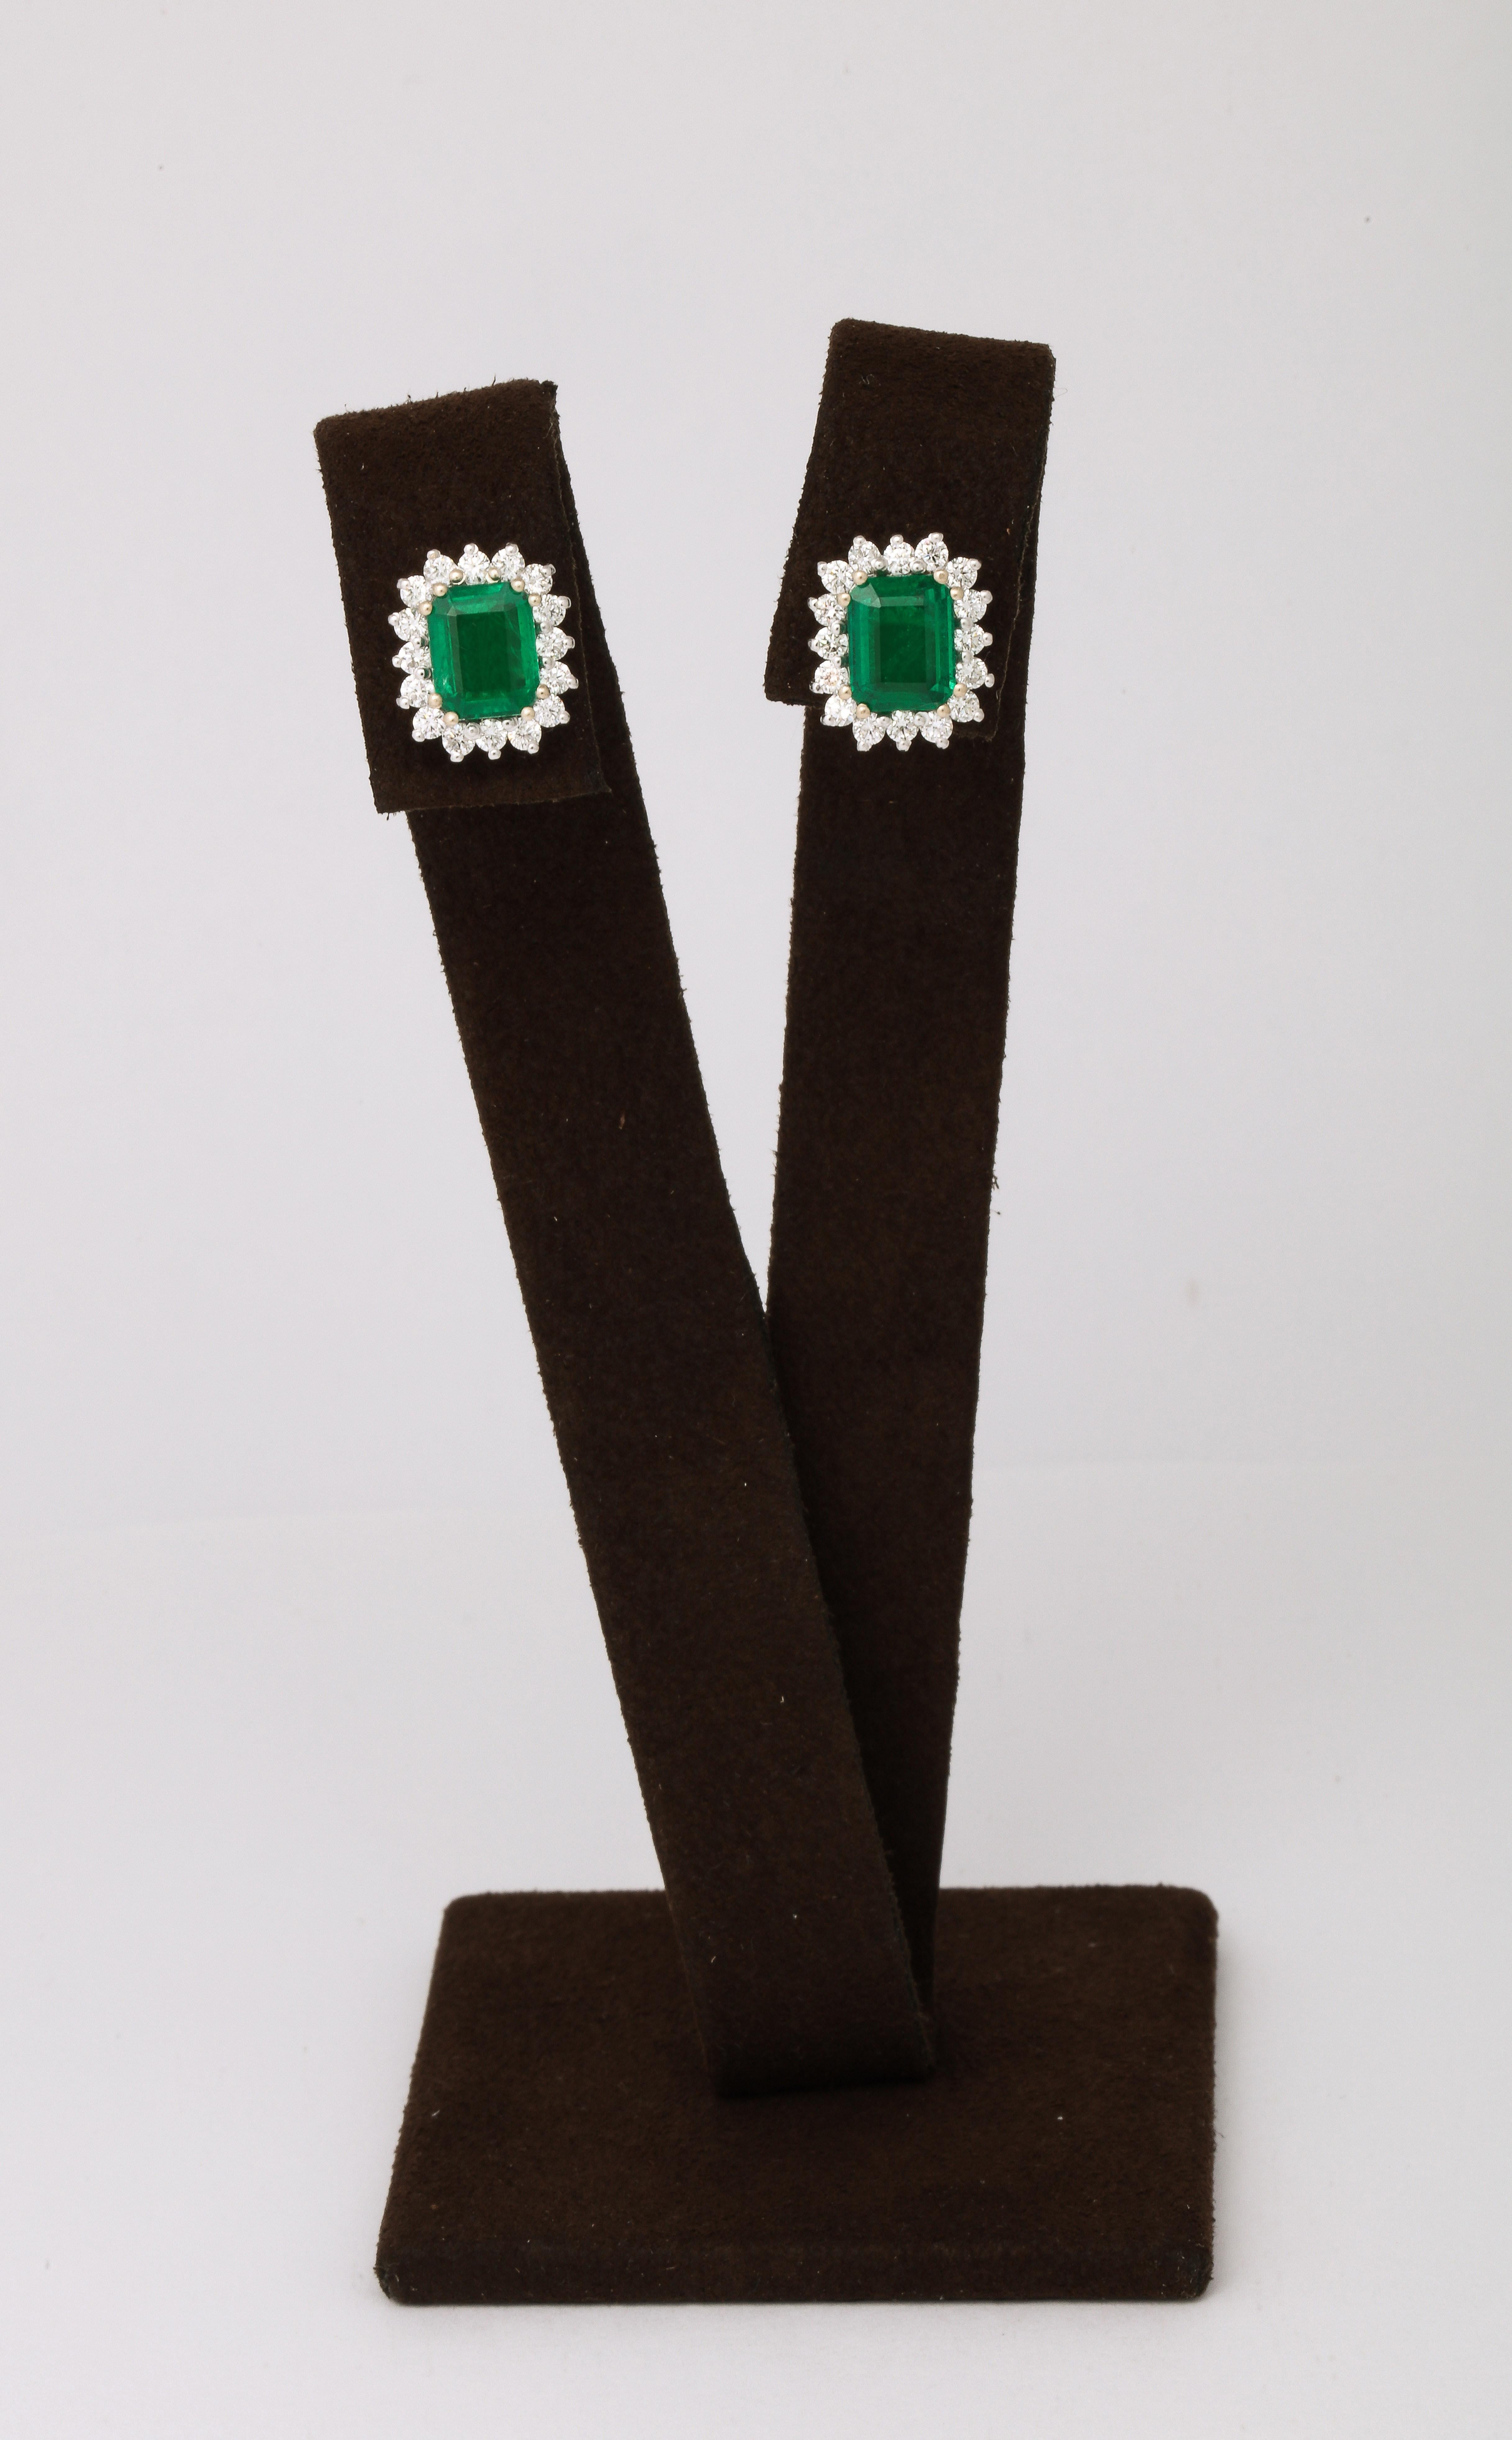 
A stunning pair of timeless emerald earrings. 

7.62 carats of certified Intense Green Emeralds 

1.51 carats of white round brilliant cut diamonds. 

Set in platinum

Just over half an inch in length 

Certified by Christian Dunaigre of